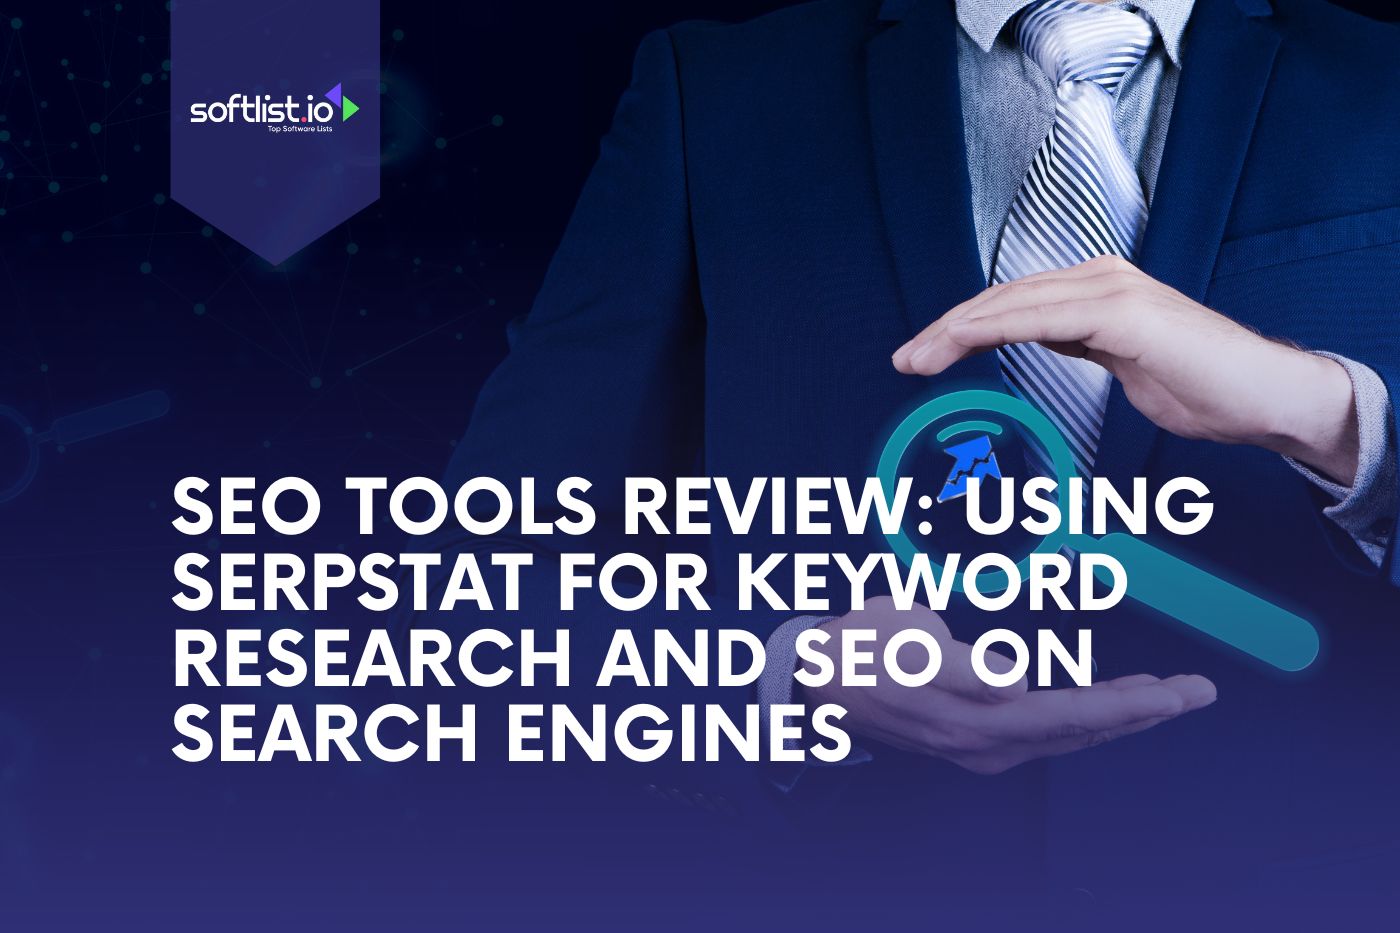 SEO Tools Review Using Serpstat For Keyword Research And SEO On Search Engines